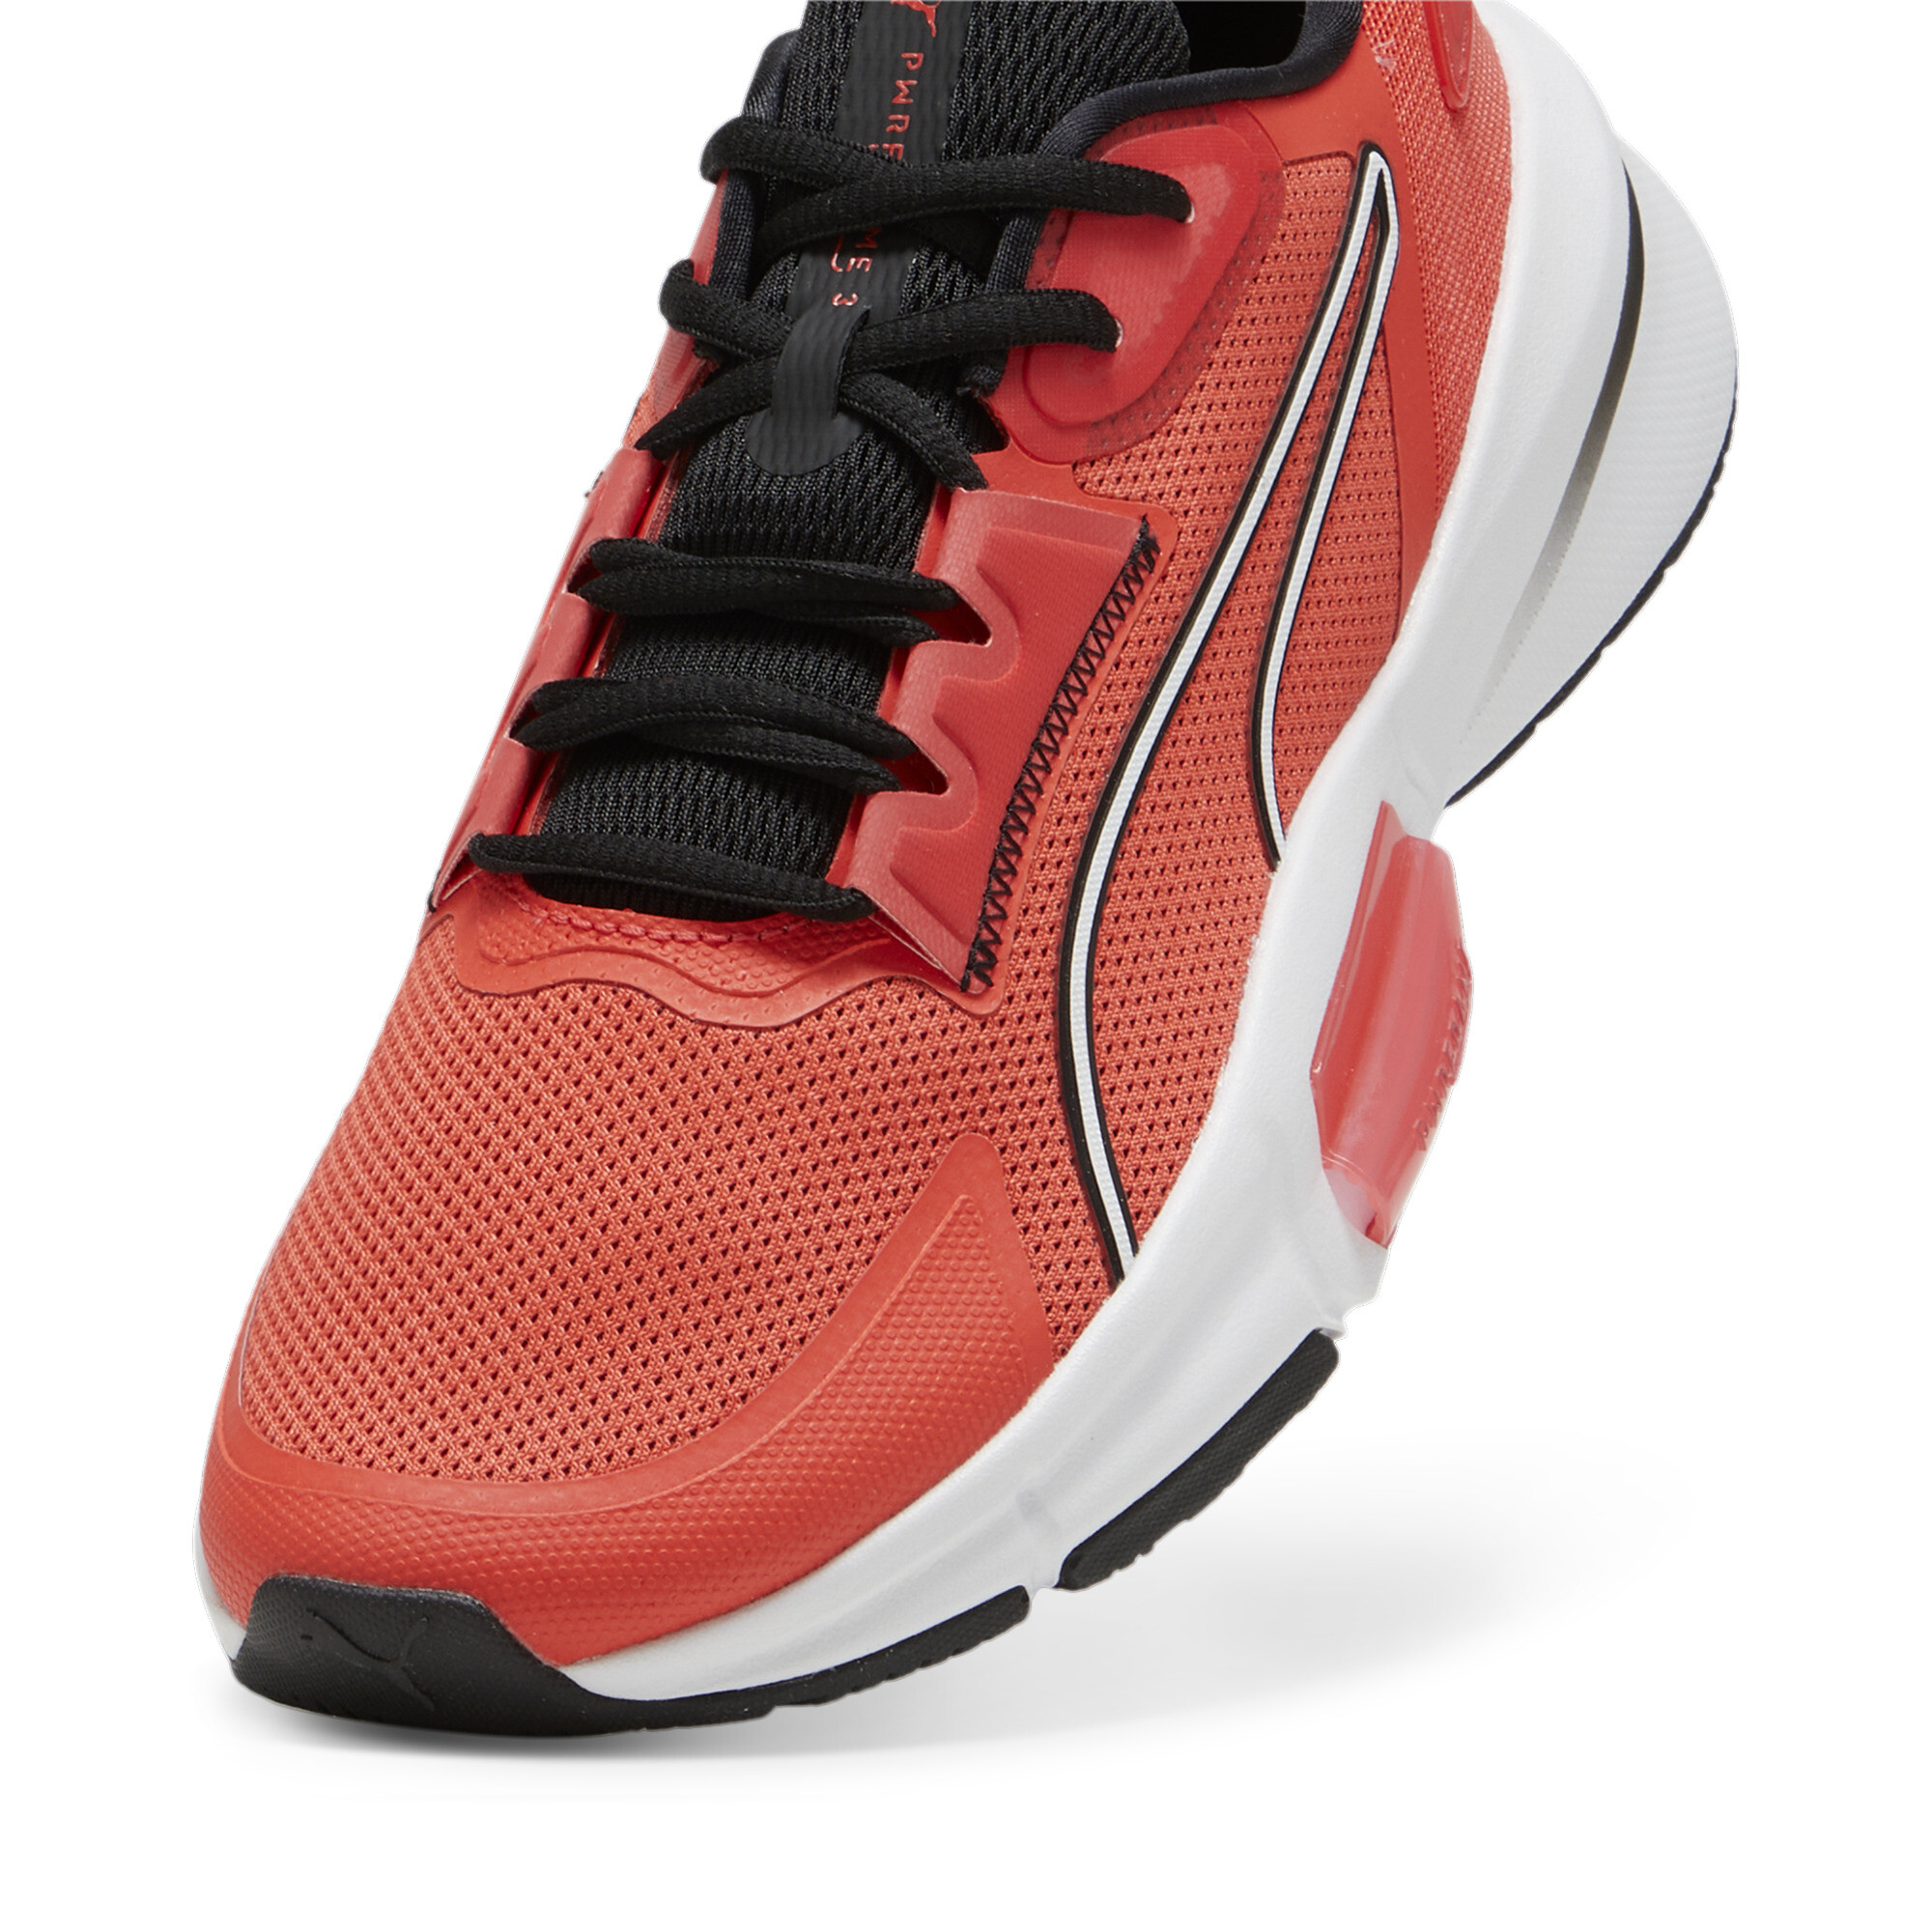 Men's PUMA PWRFrame TR 3 Training Shoes In Red, Size EU 43